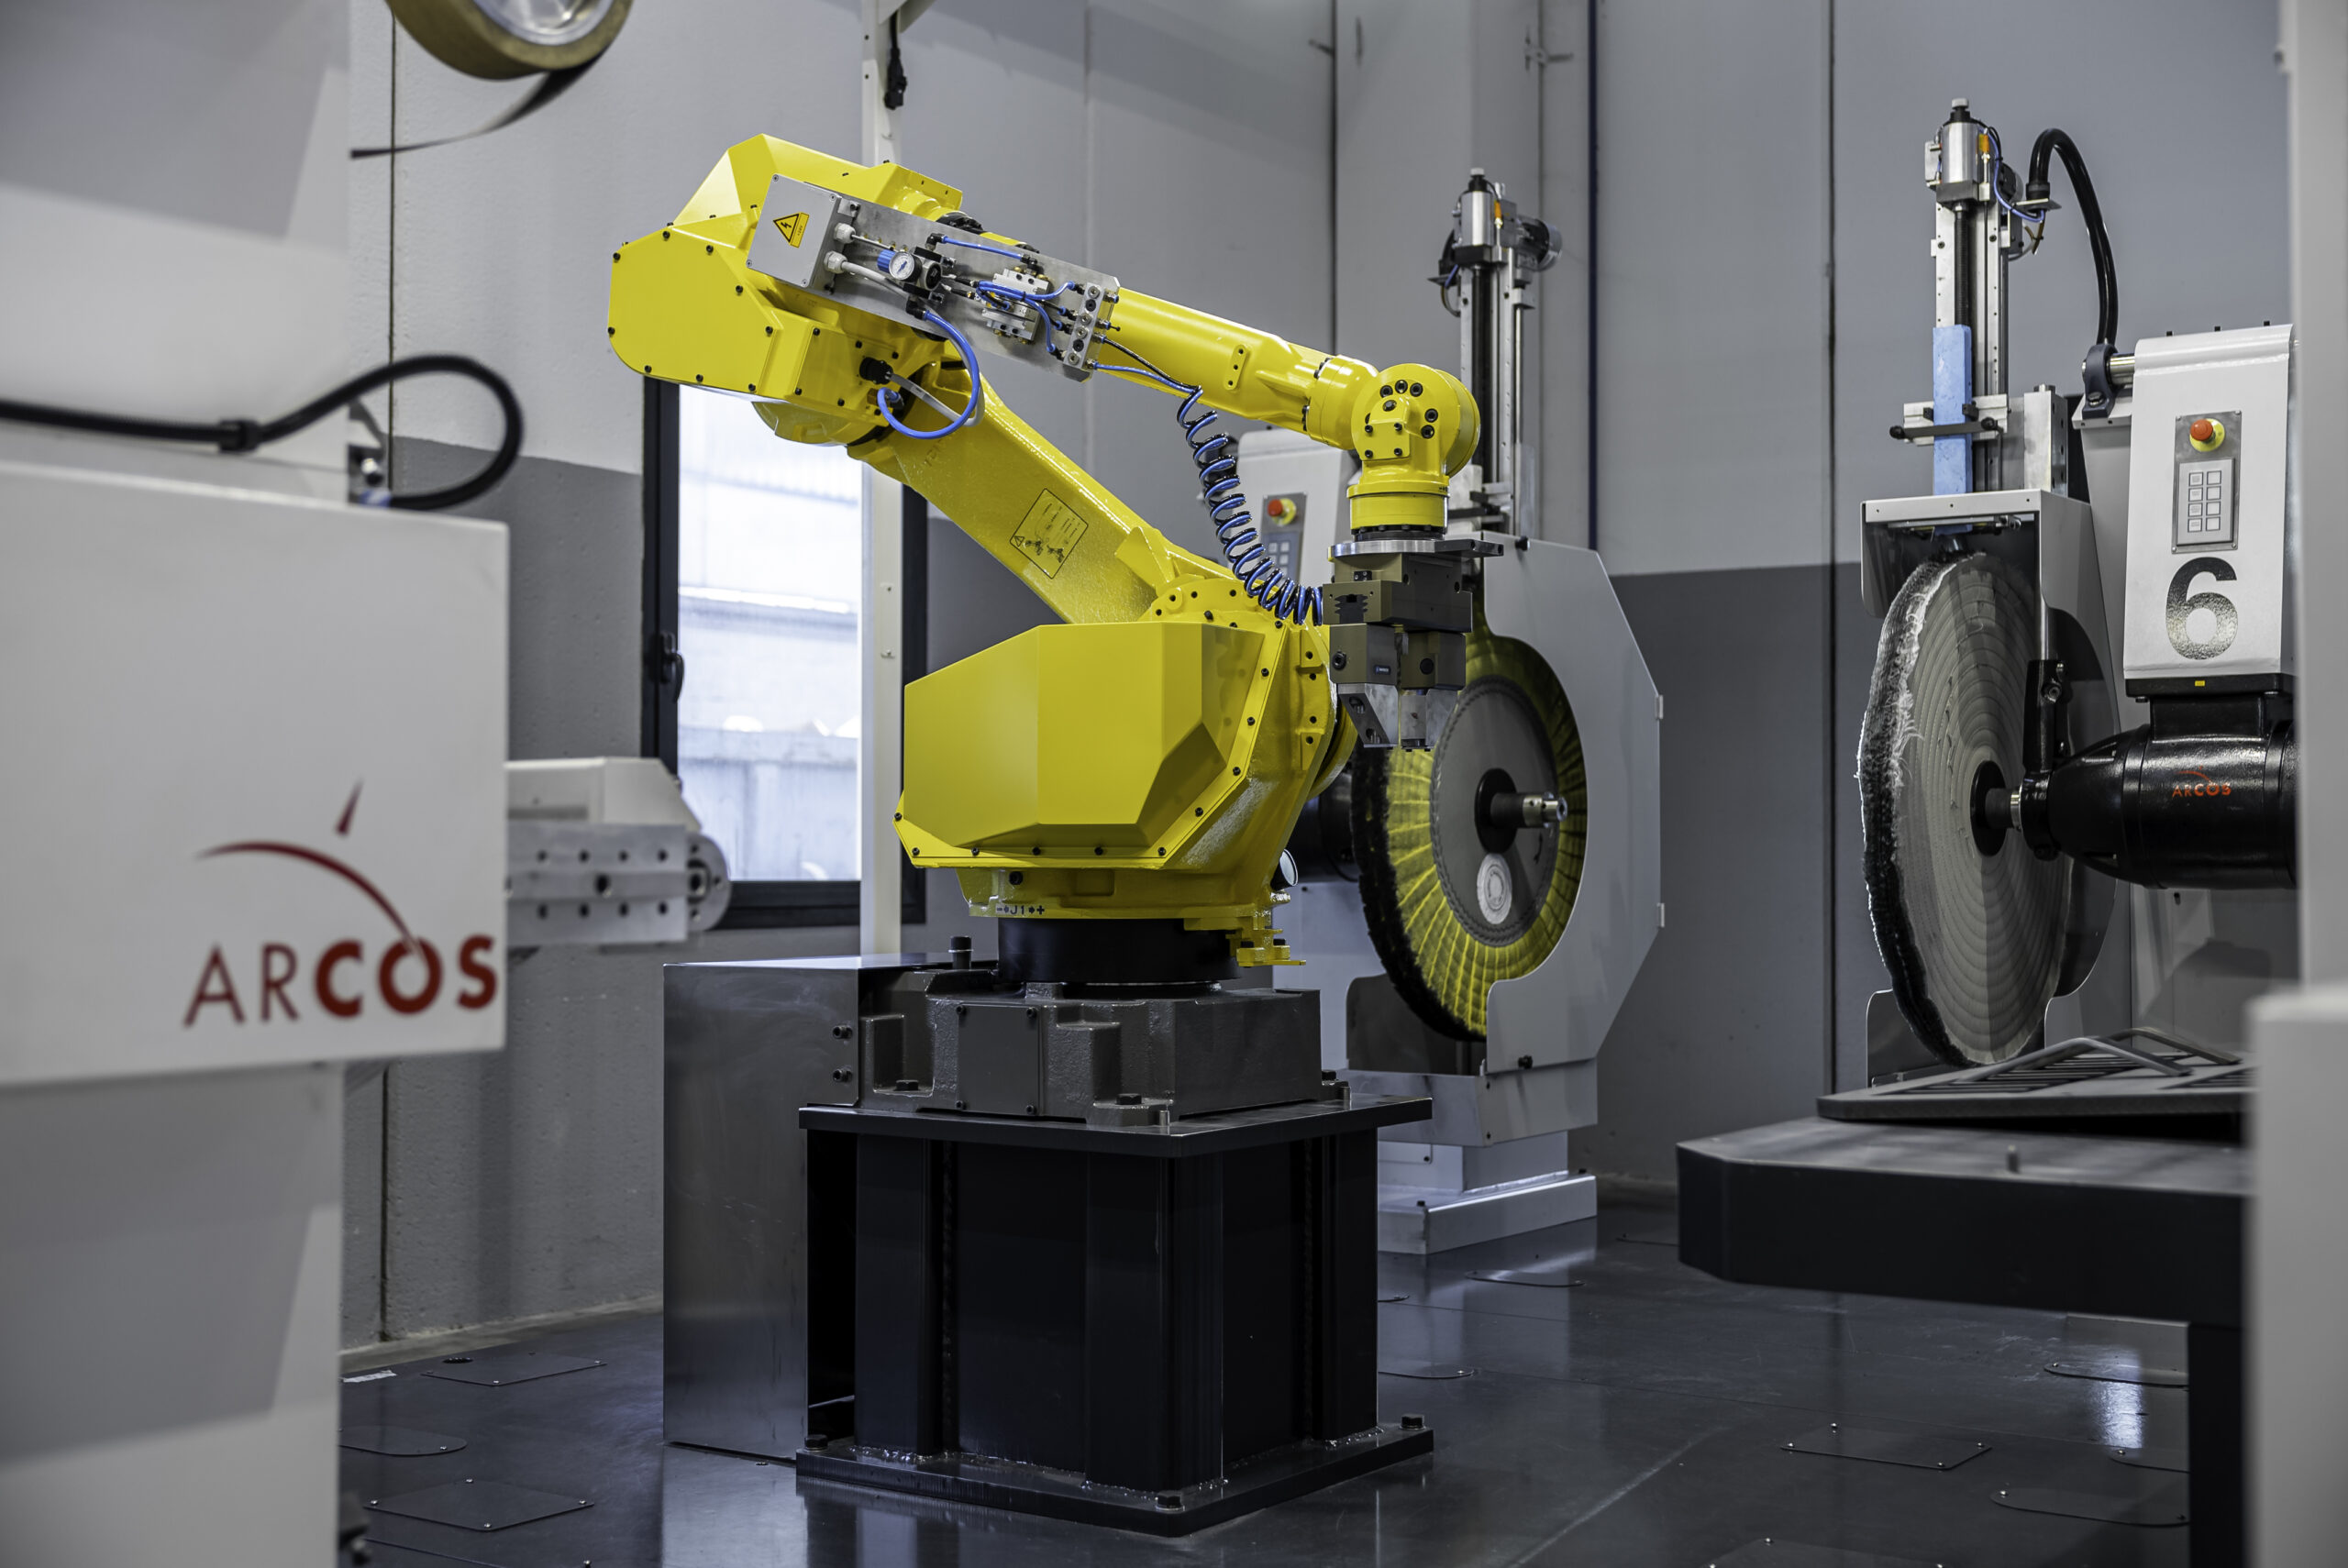 Robotics in Industry 4.0: all you need to know about the industry of the future